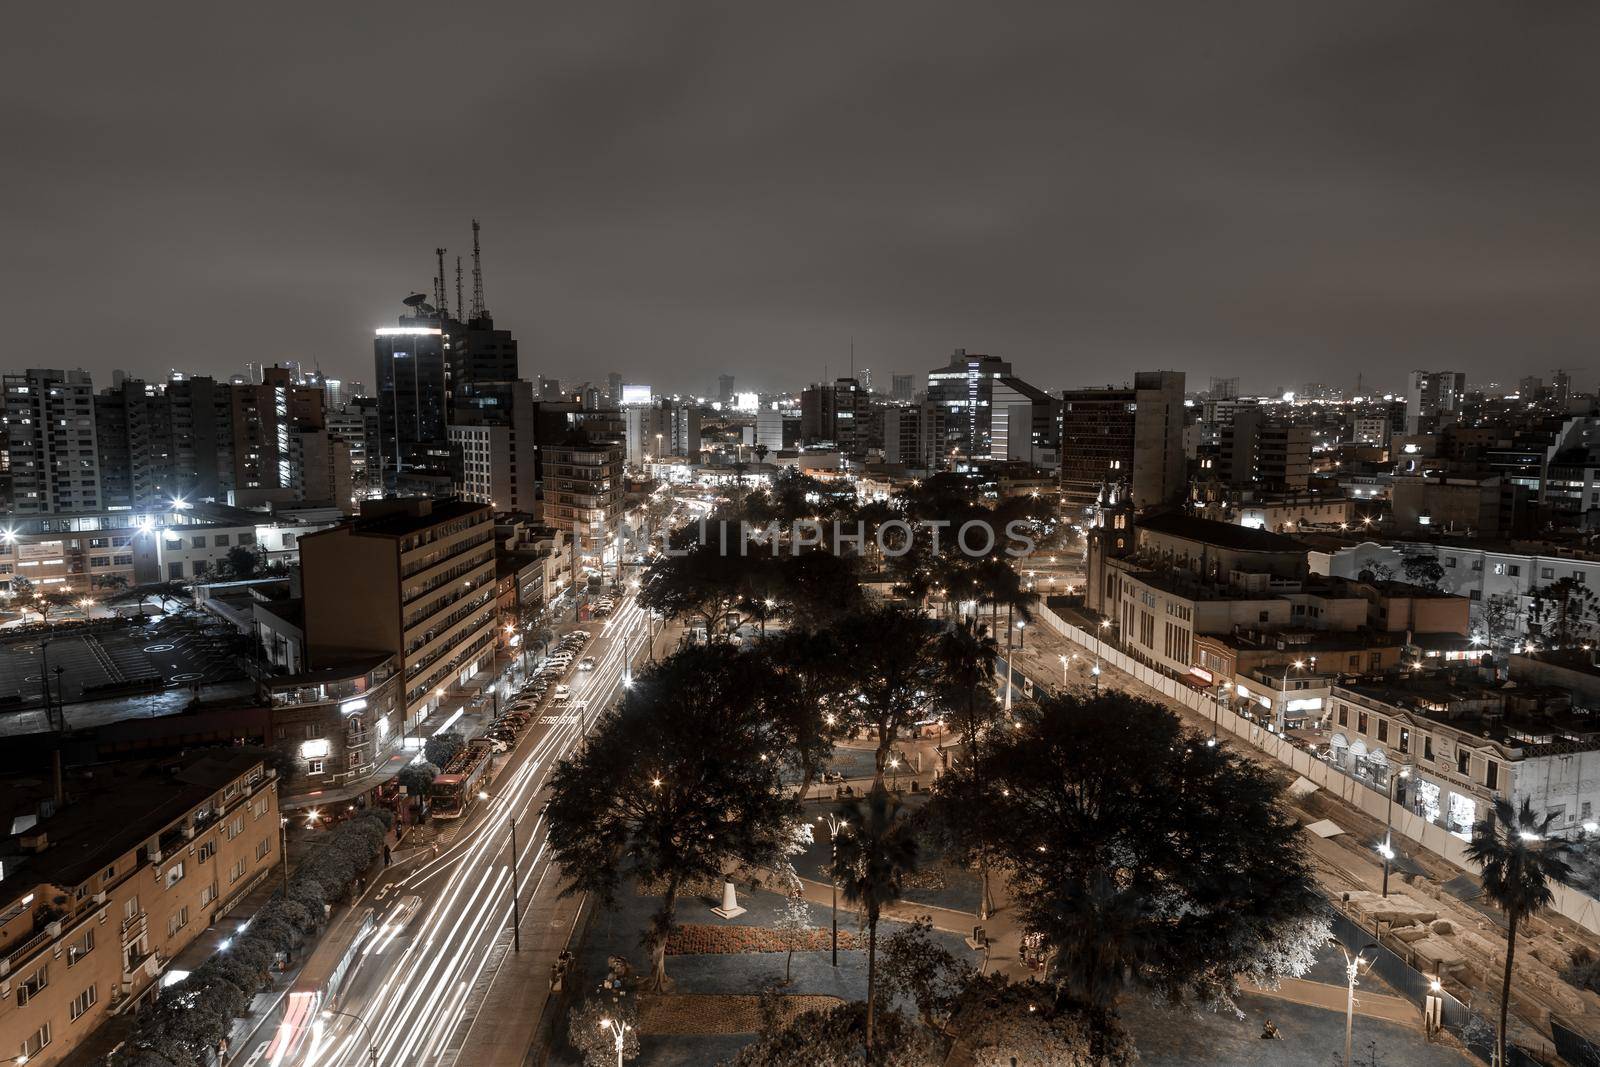 Lima, Peru - September 06, 2015: Black and white shot of Kennedy park in the centre of the district Miraflores at night